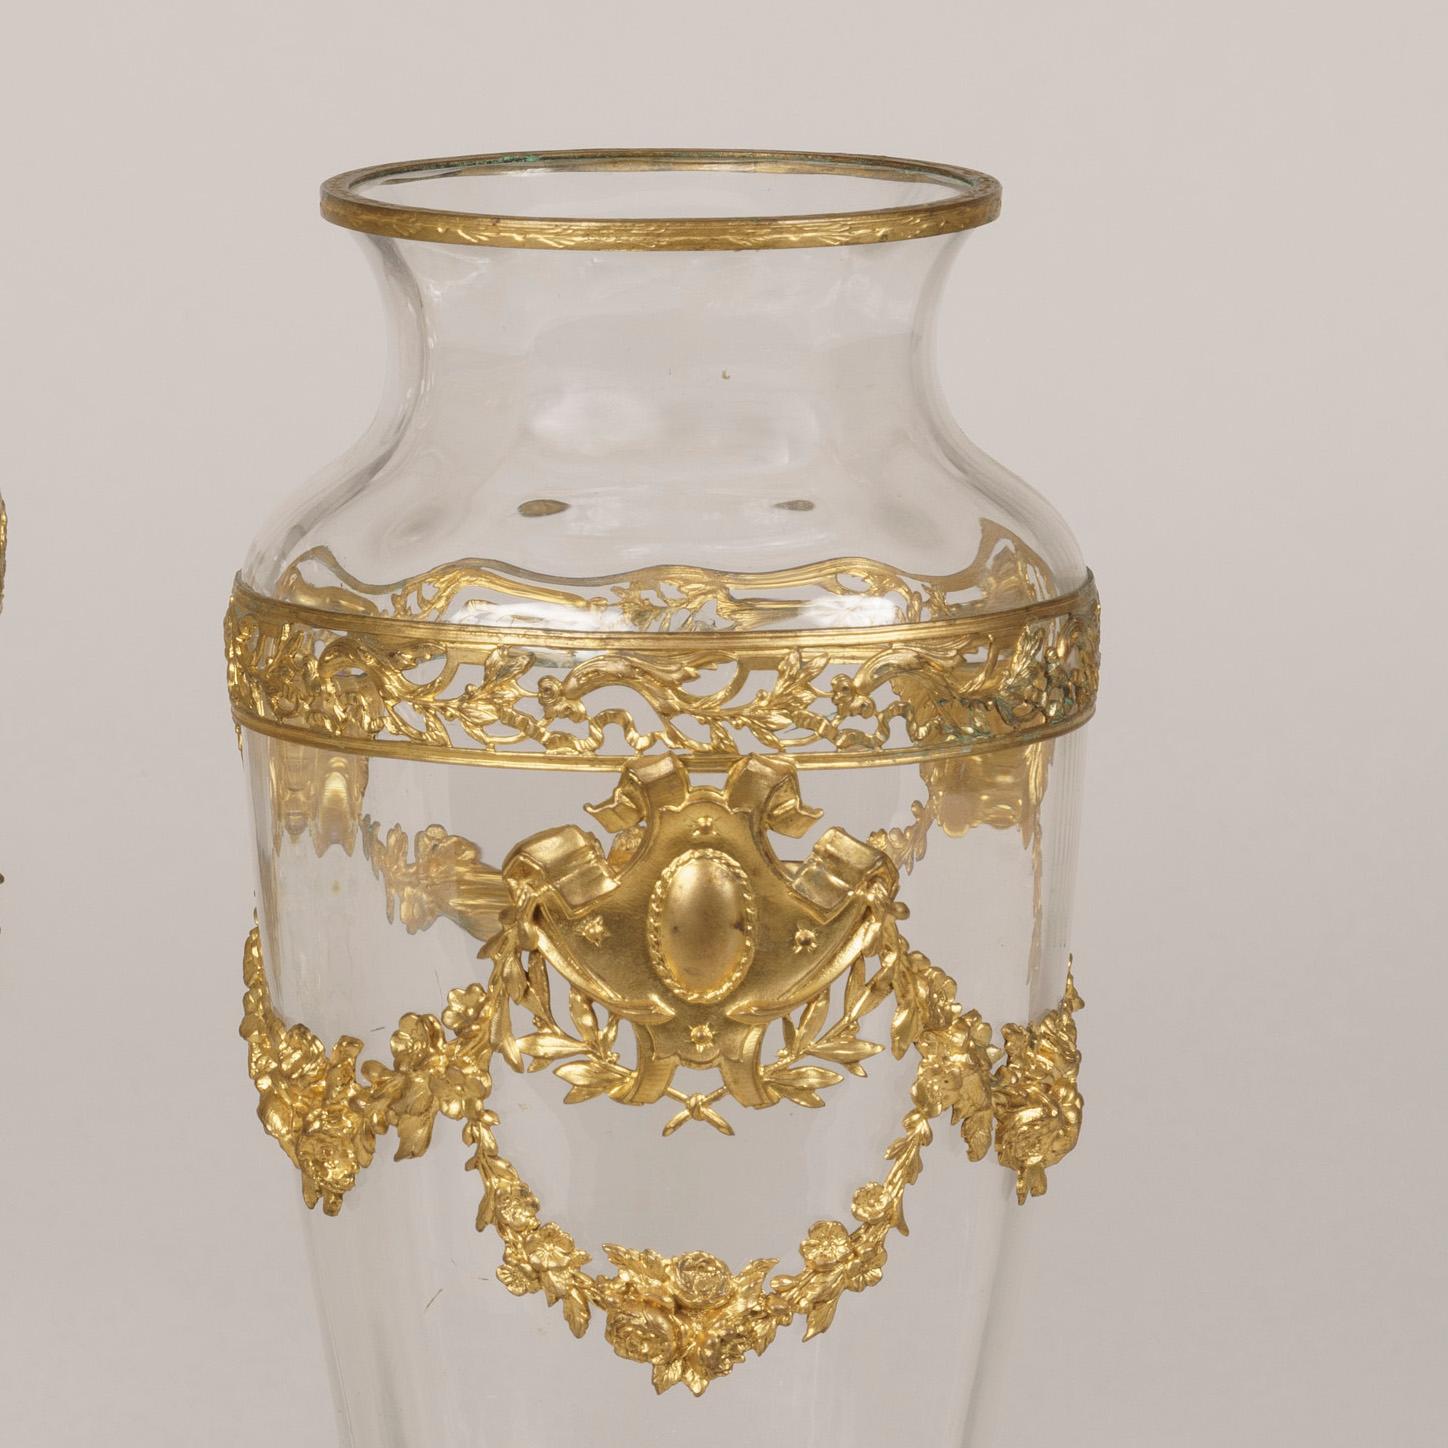 A pair of crystal glass vases attributed to Baccarat

Of inverted baluster ribbed form, and dressed with gilt bronze pierced bands, and foliate swags and garlands in the Belle Époque taste.
French, circa 1900

Baccarat
A licence and permission